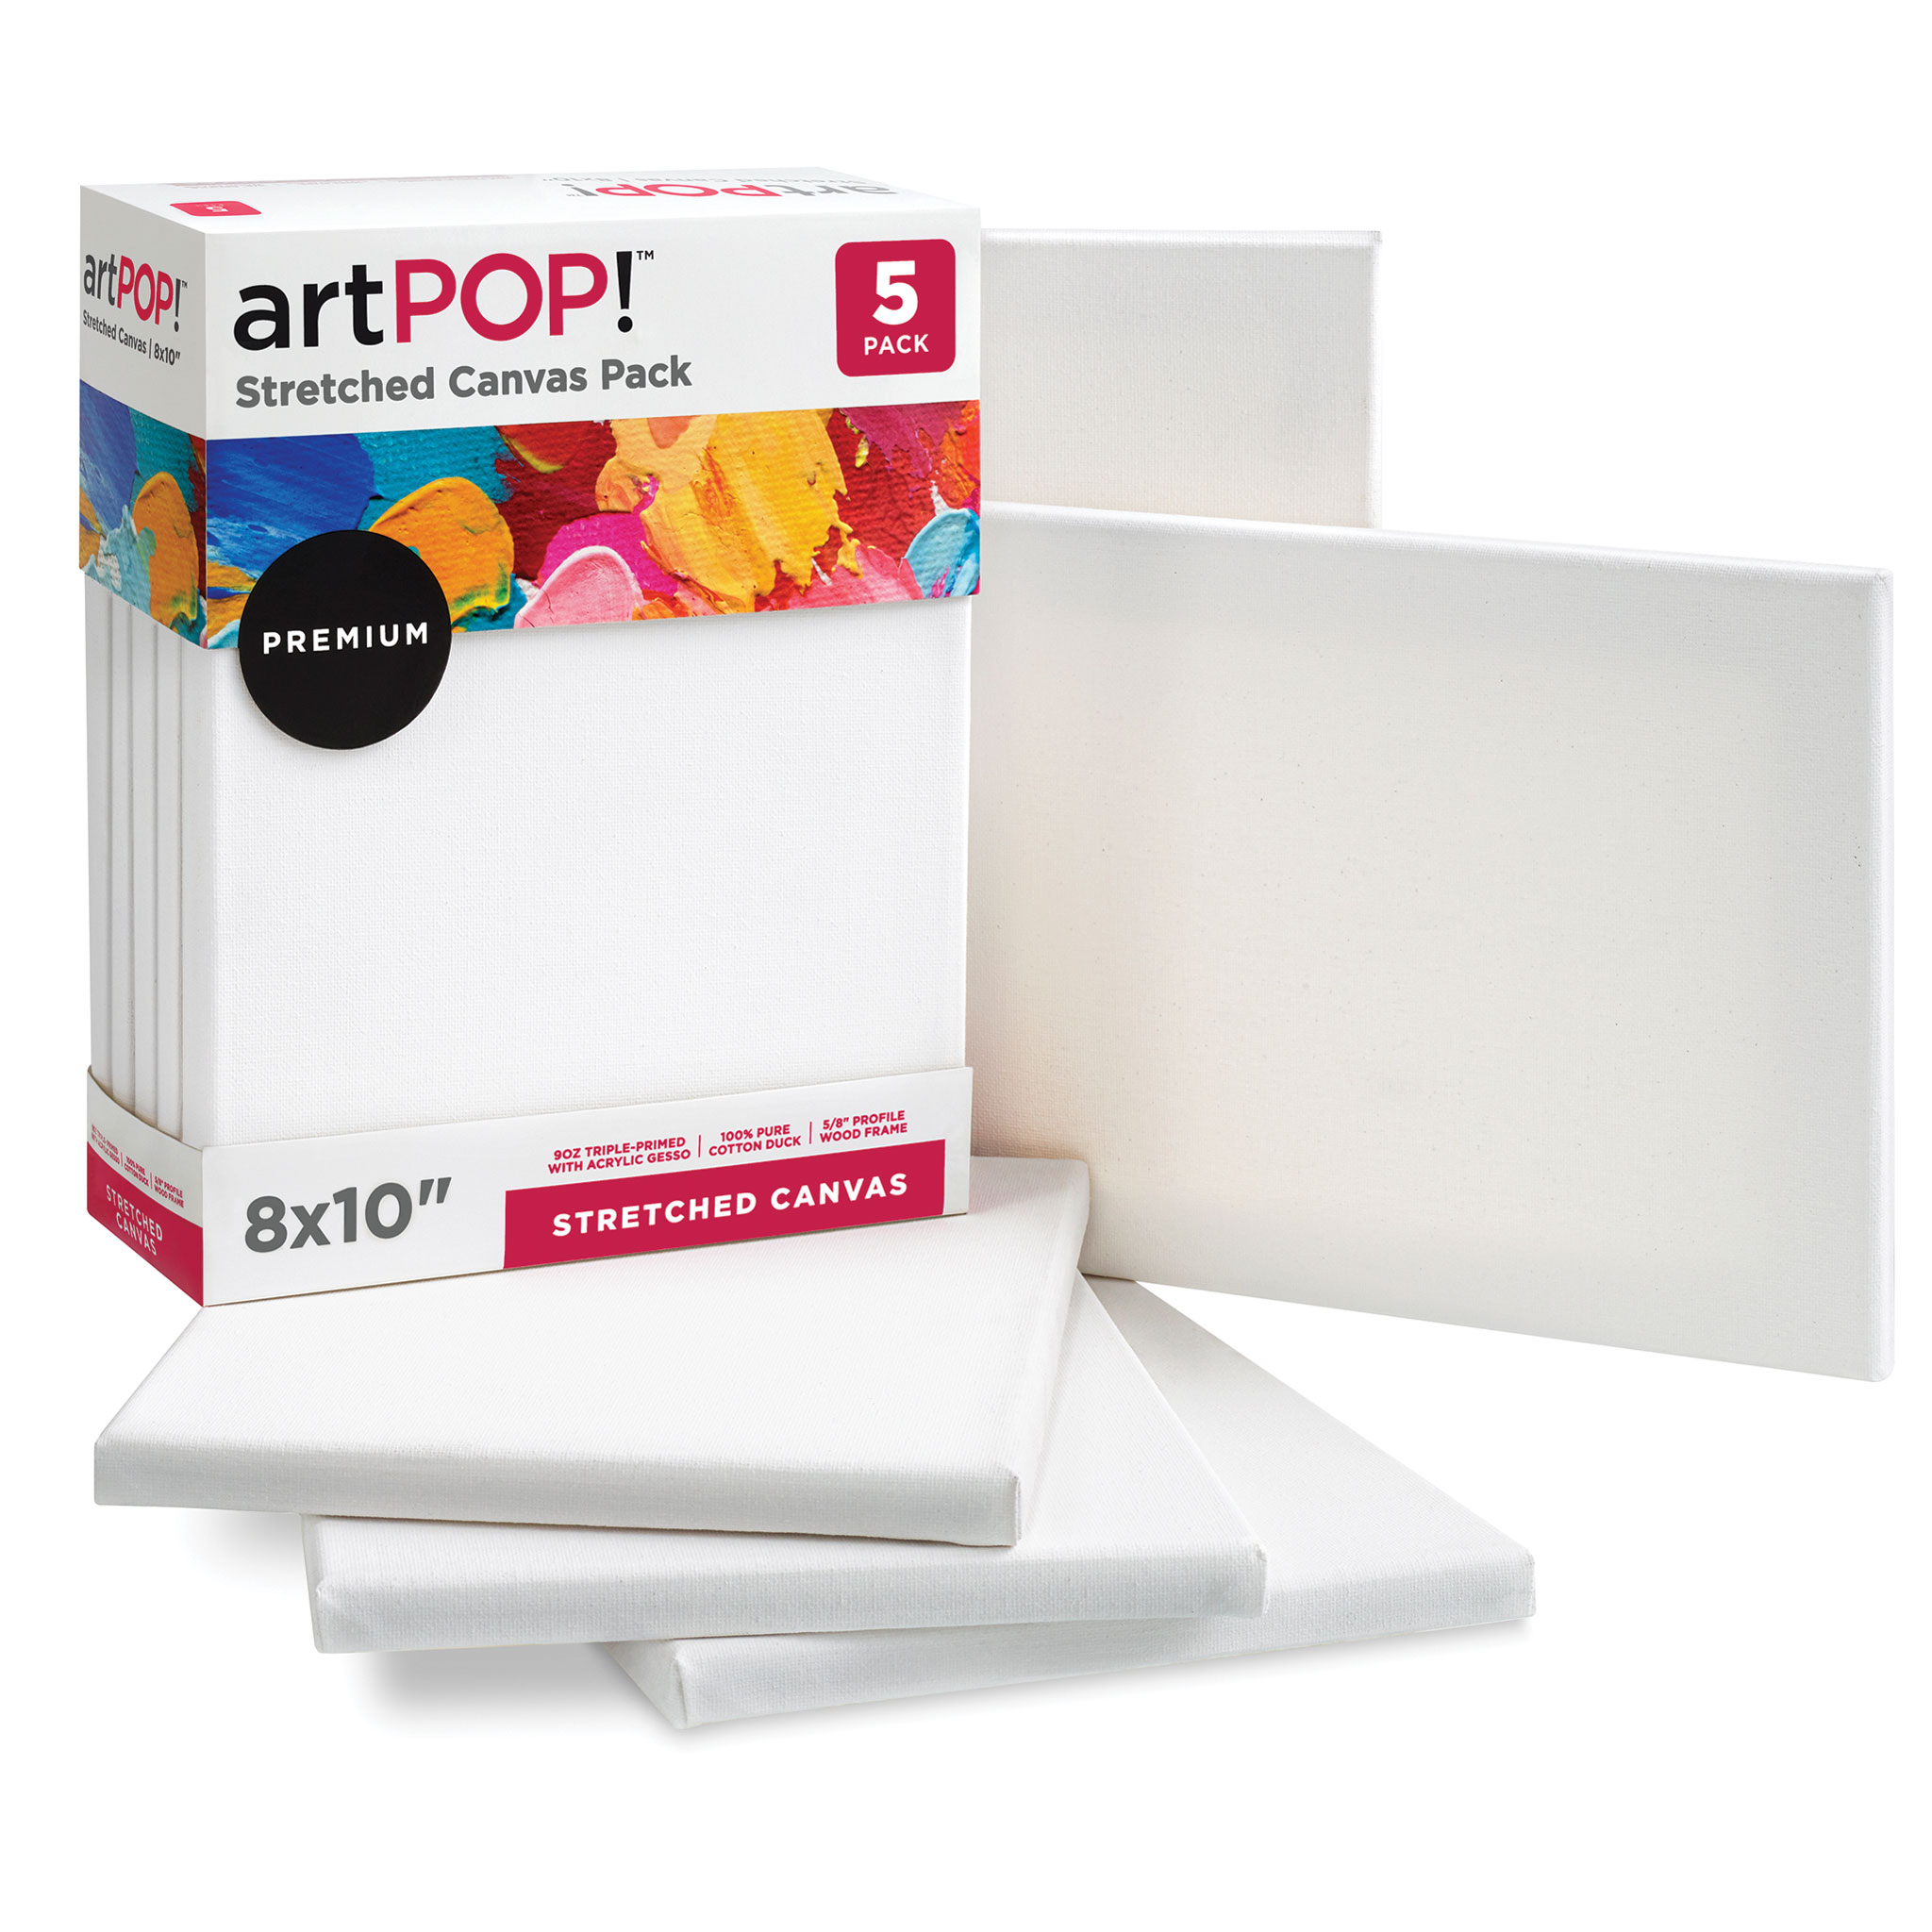 artPOP! Stretched Canvas Pack - 8 inch x 10 inch, Pkg of 5